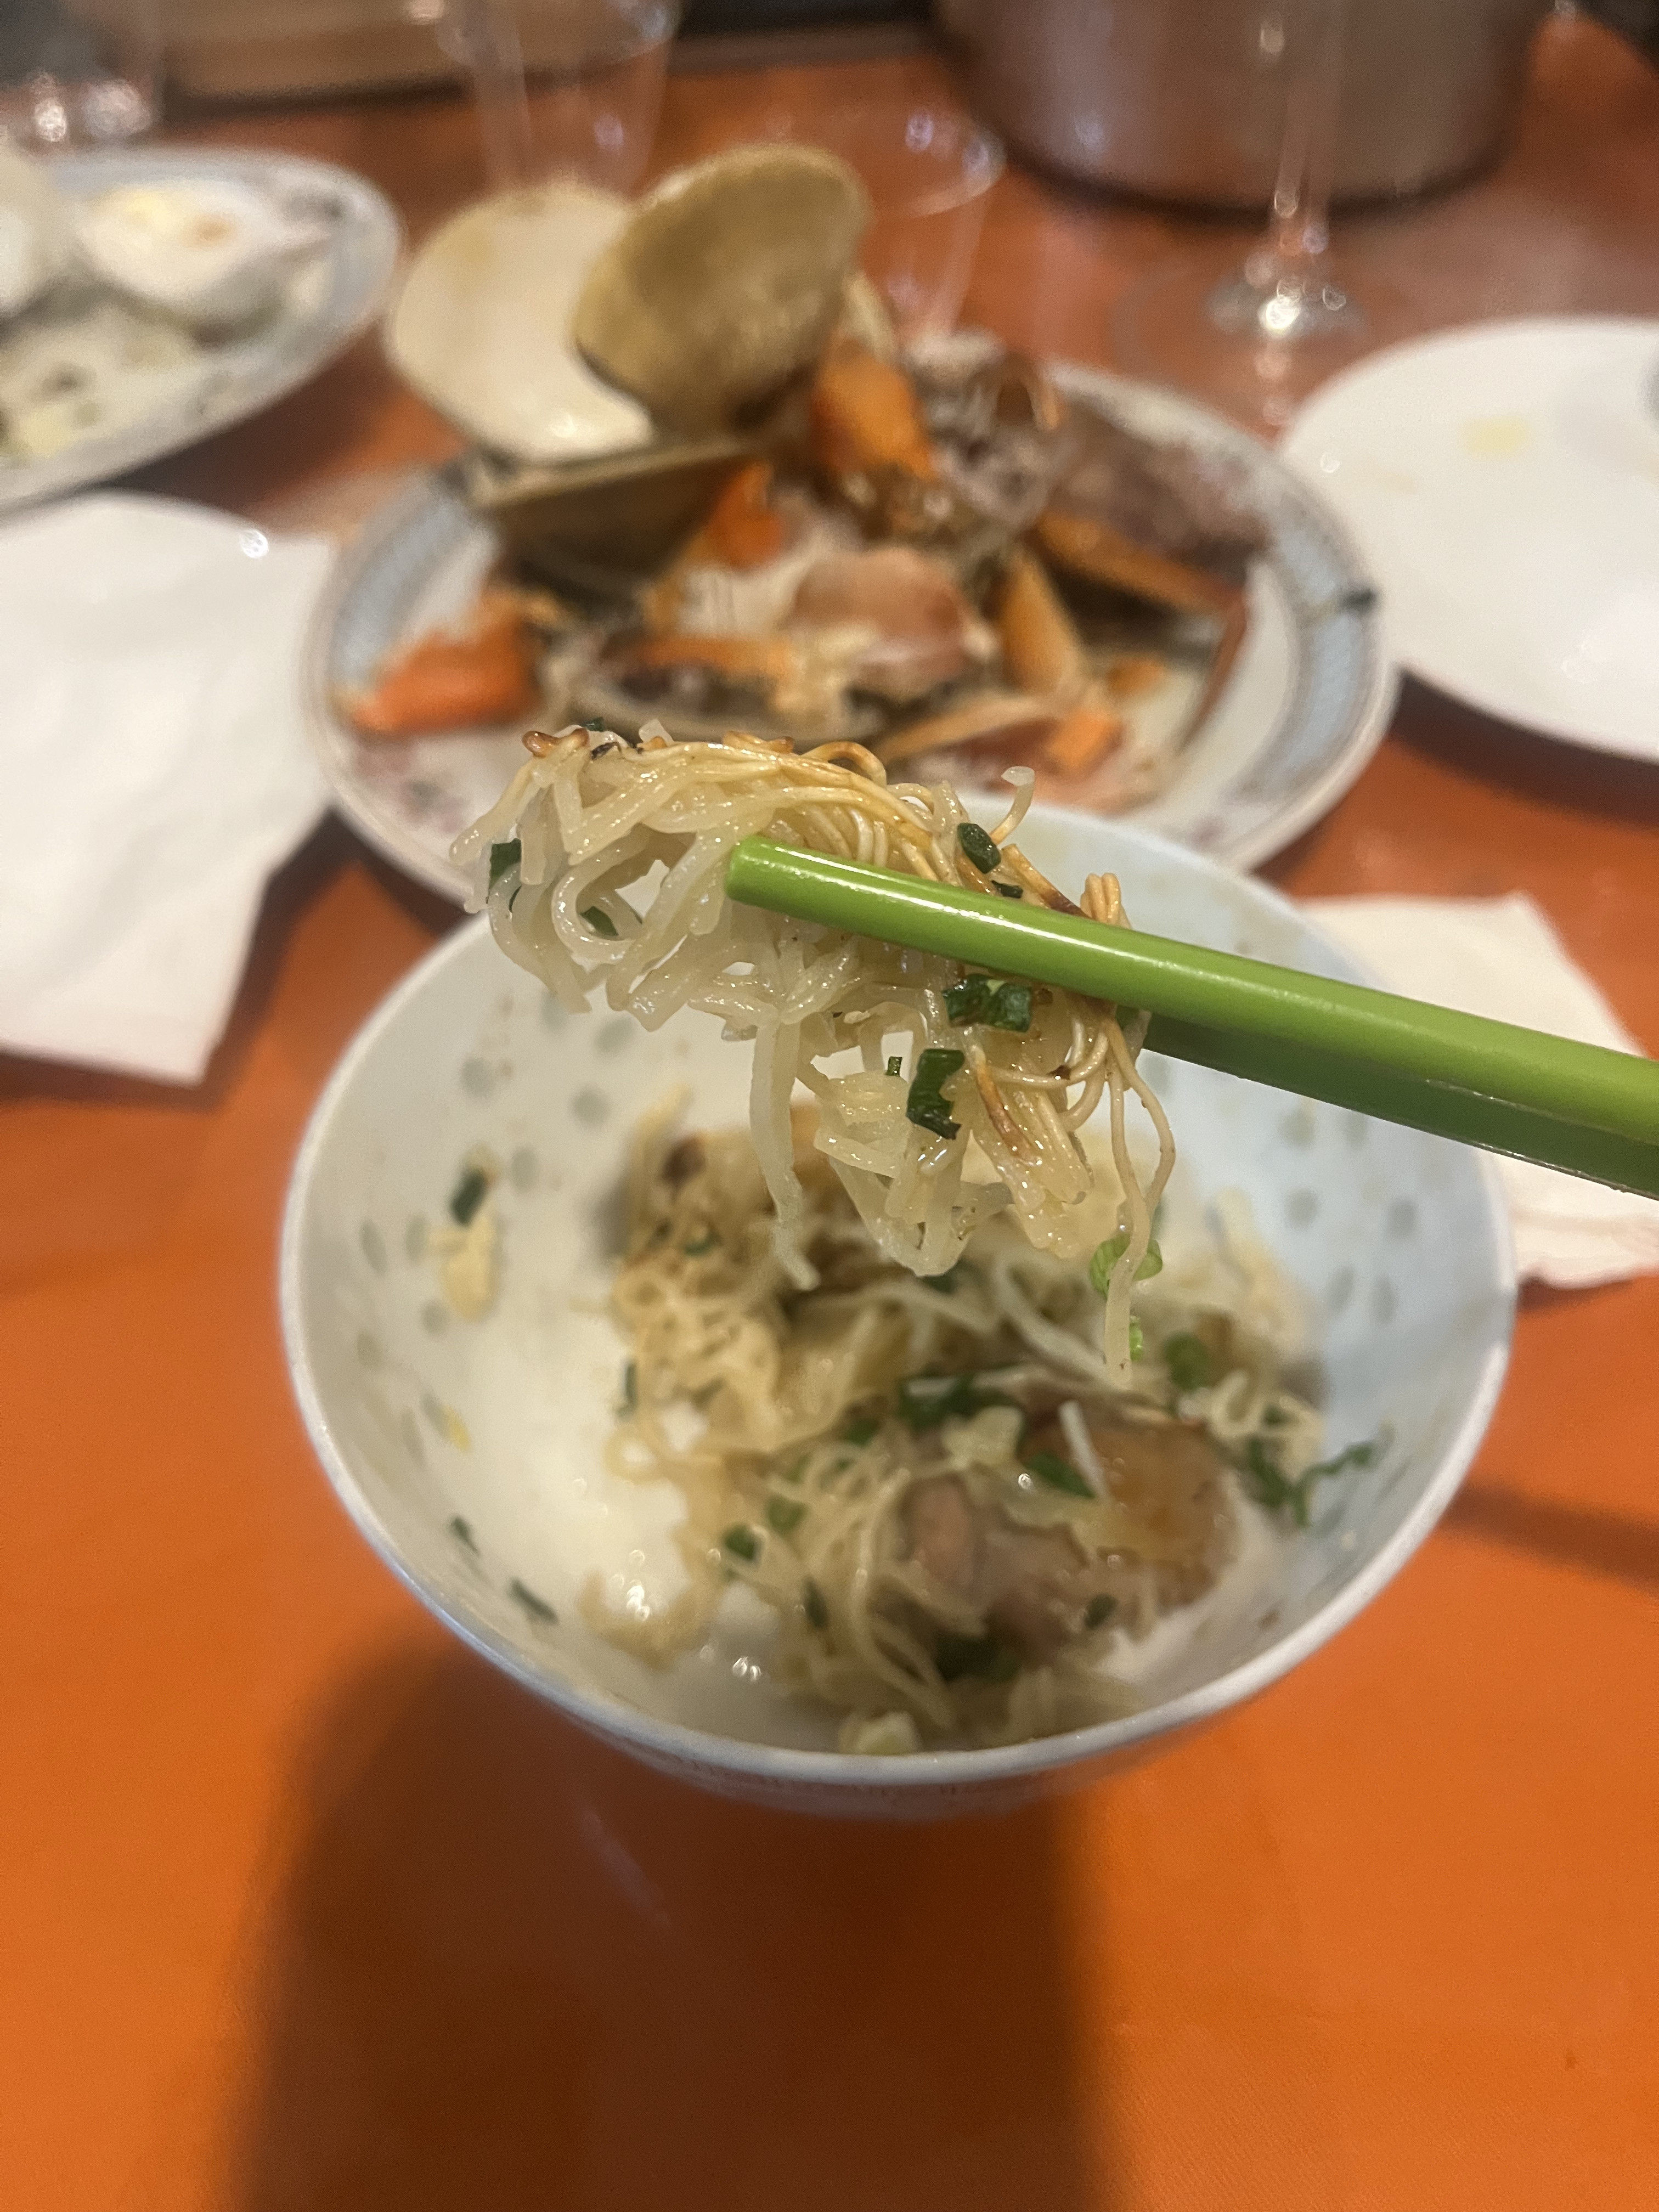 In Chinese culture, there are meals that celebrate a single ingredient. Above: crispy vermicelli cooked in the chicken and seafood juices from two earlier courses at Sossam Tea House, in To Kwa Wan, Hong Kong. Photo: Sossam Tea House